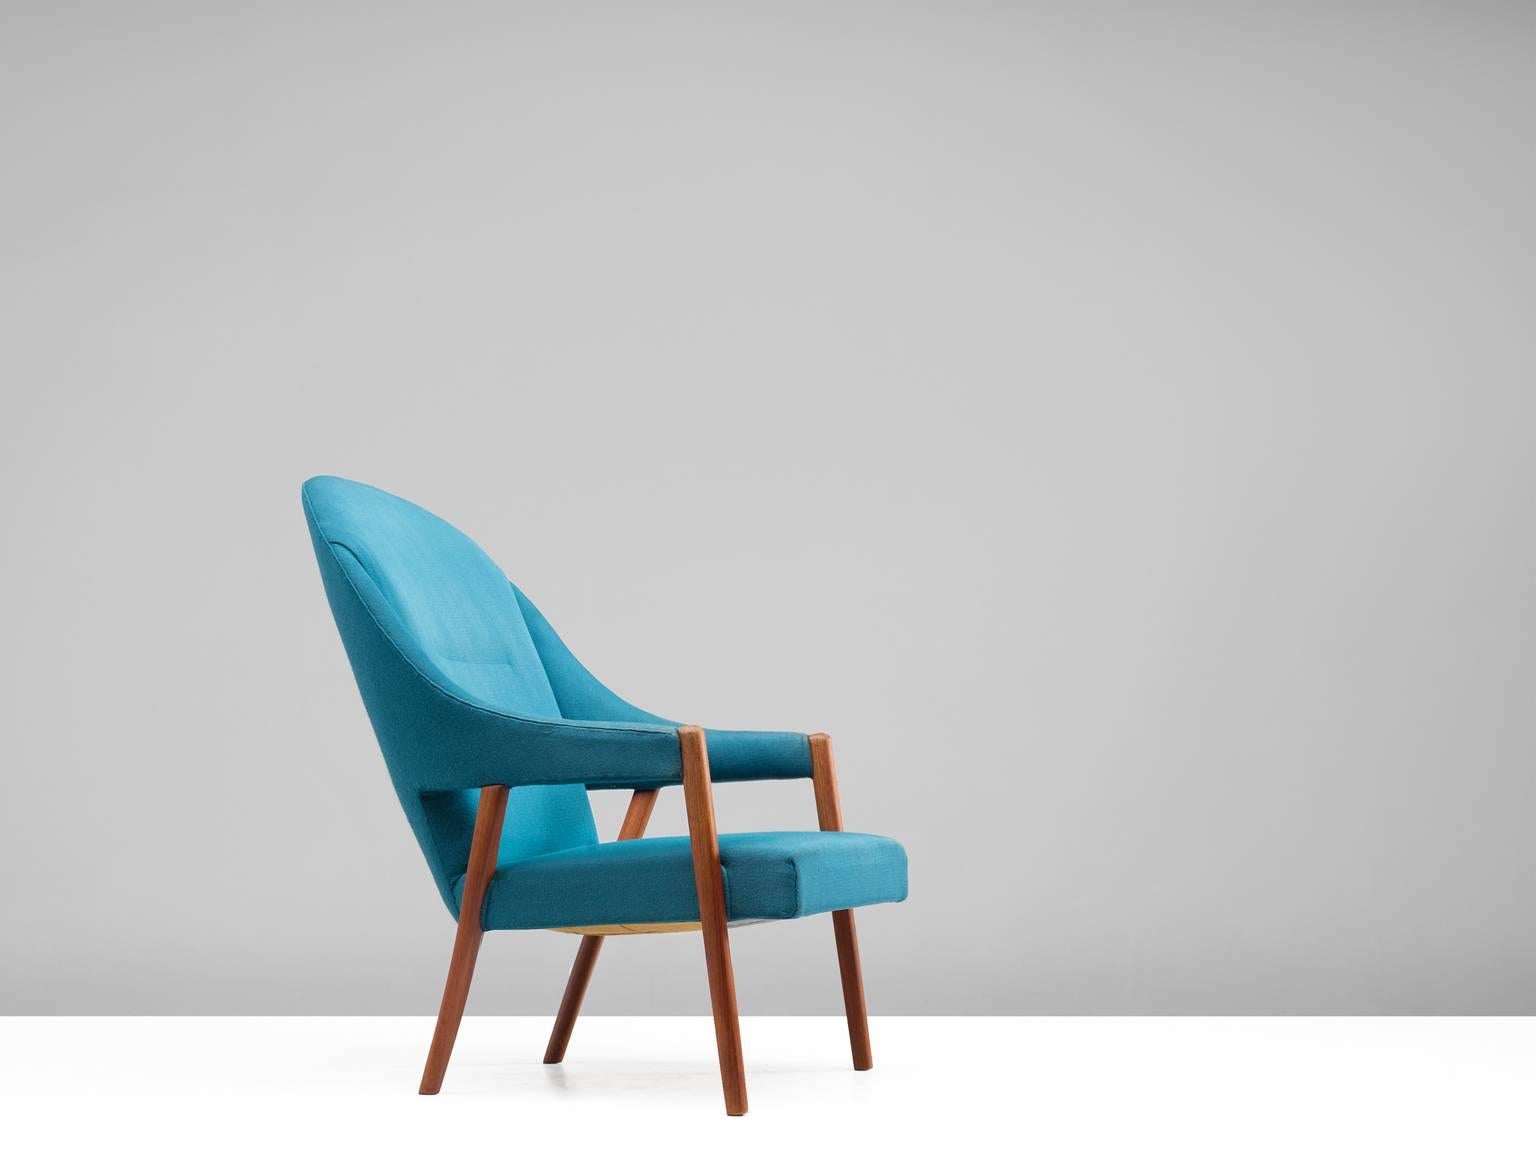 Easy chair, blue upholstery, teak, Denmark, 1950s. 

This sculptural lounge chair is upholstered in a bright blue fabric. The stately chair, which originates from the 1950s is an airy, sculptural example of the mostly minimalistic modern Danish